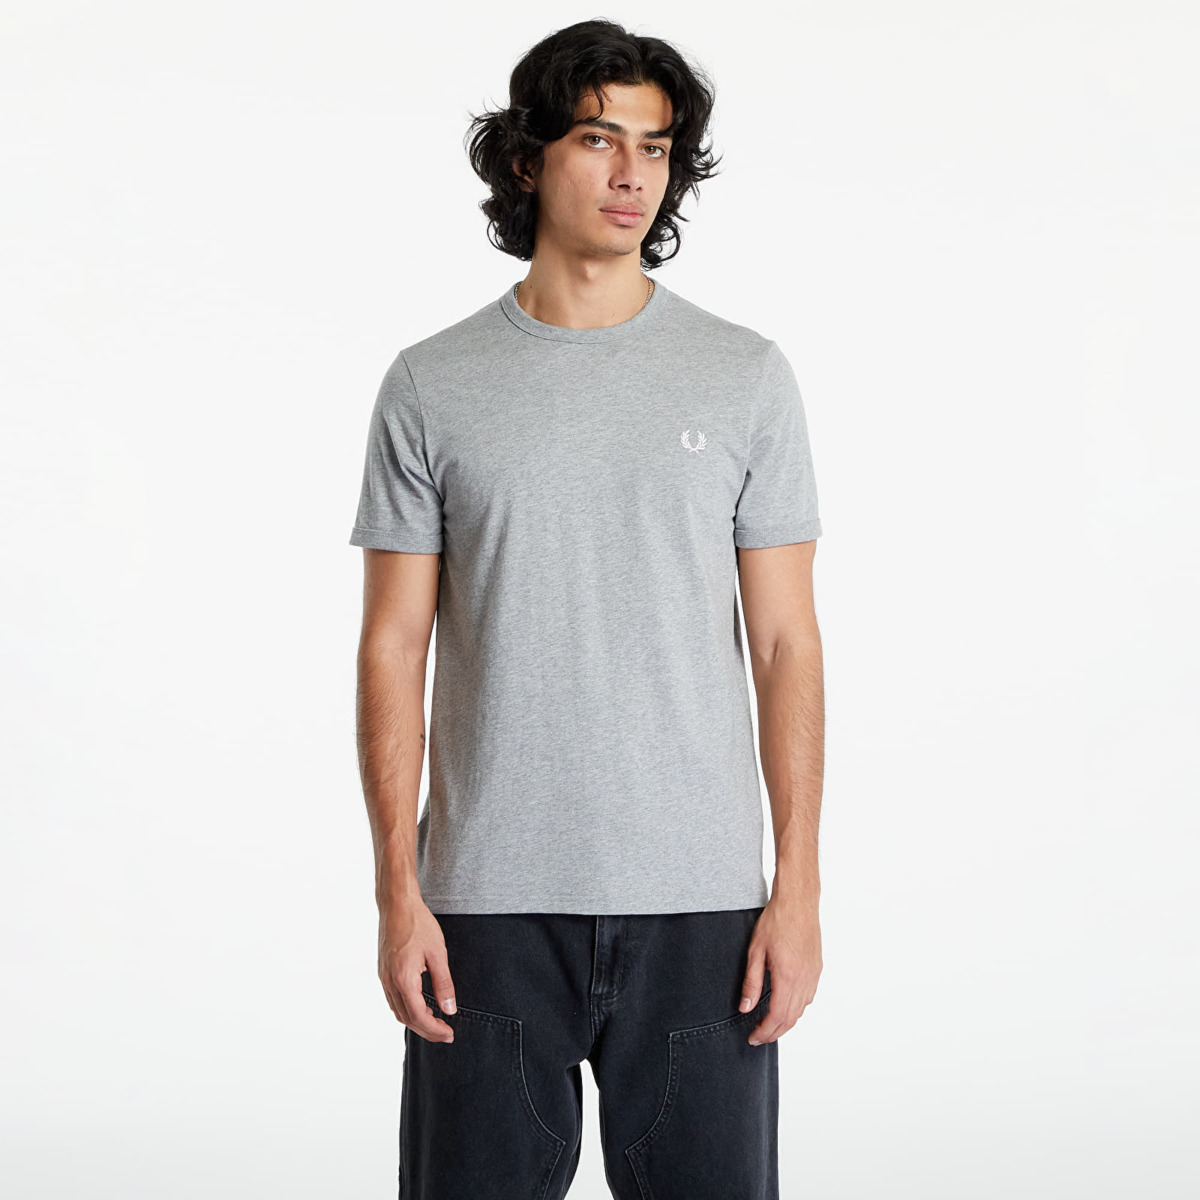 Fred Perry Man Ringer T-Shirt in Grey by Footshop GOOFASH